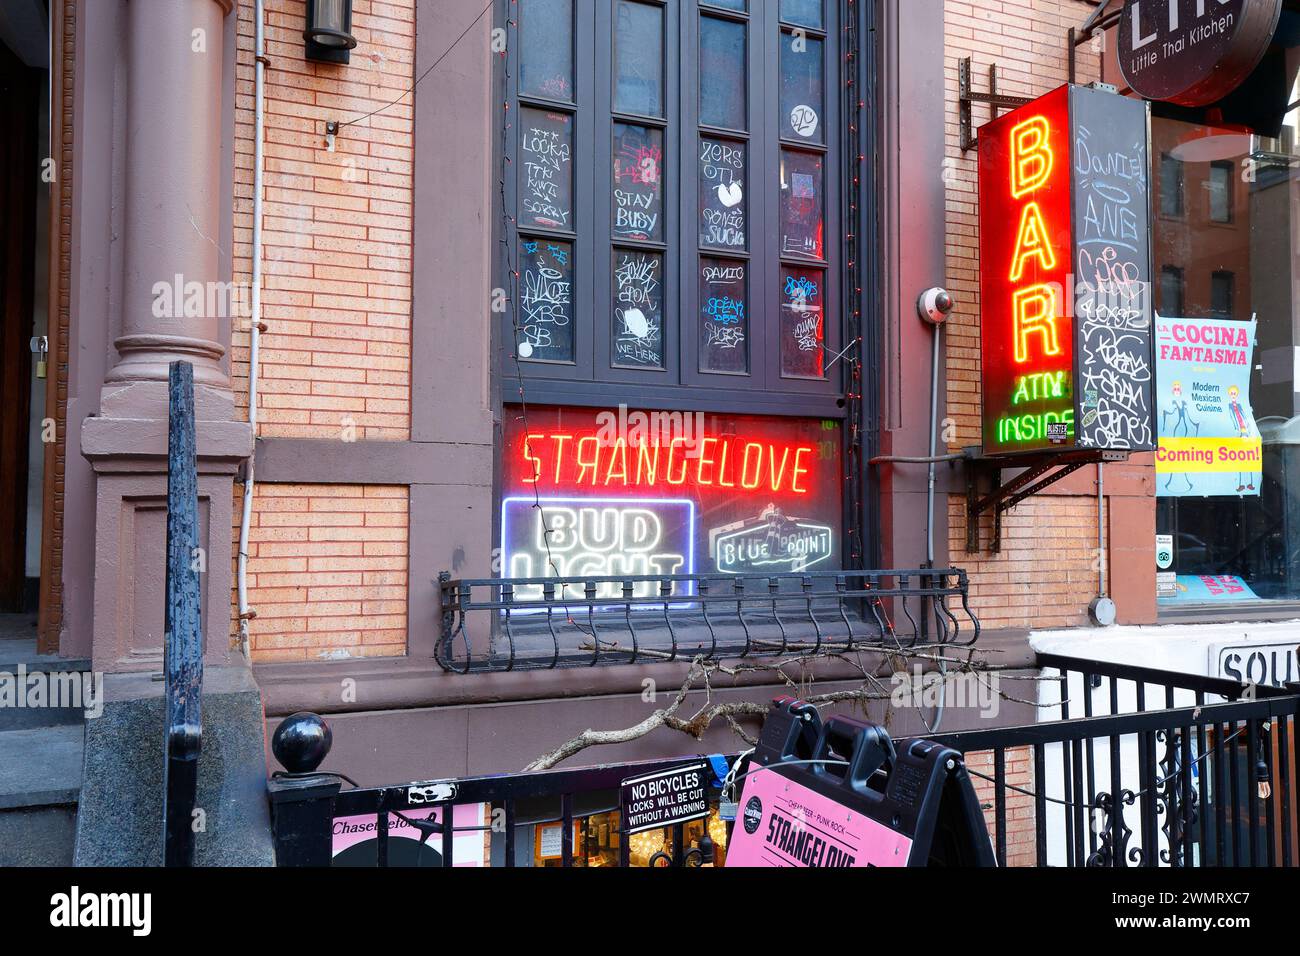 Strangelove Bar, 229 E 53rd St, New York, NYC storefront of a bar with a punk rock vibe in Midtown Manhattan. Stock Photo